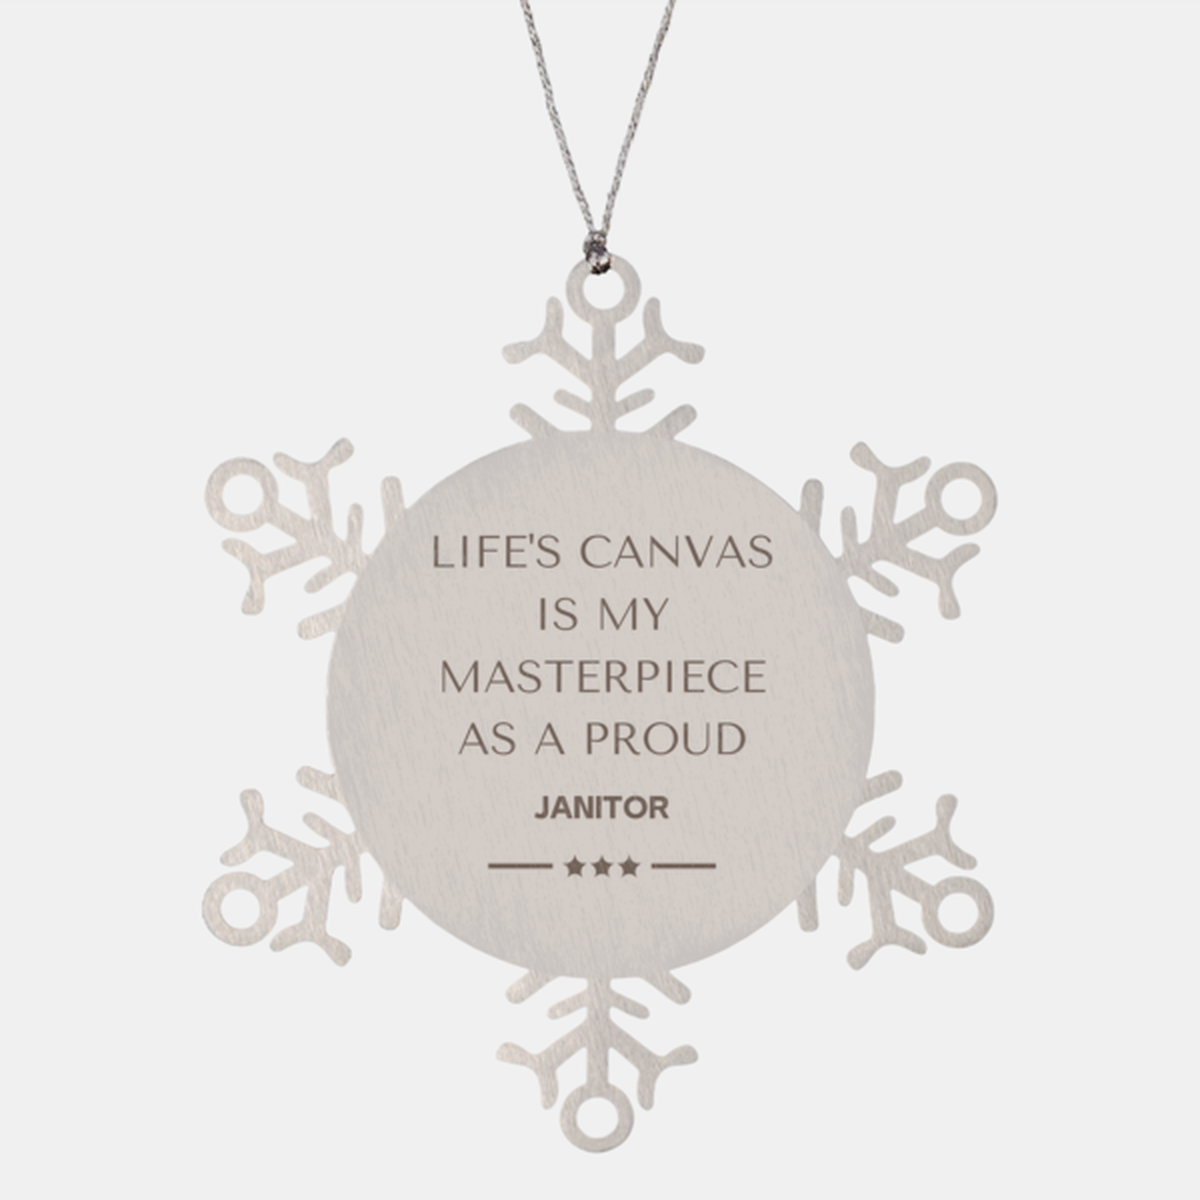 Proud Janitor Gifts, Life's canvas is my masterpiece, Epic Birthday Christmas Unique Snowflake Ornament For Janitor, Coworkers, Men, Women, Friends